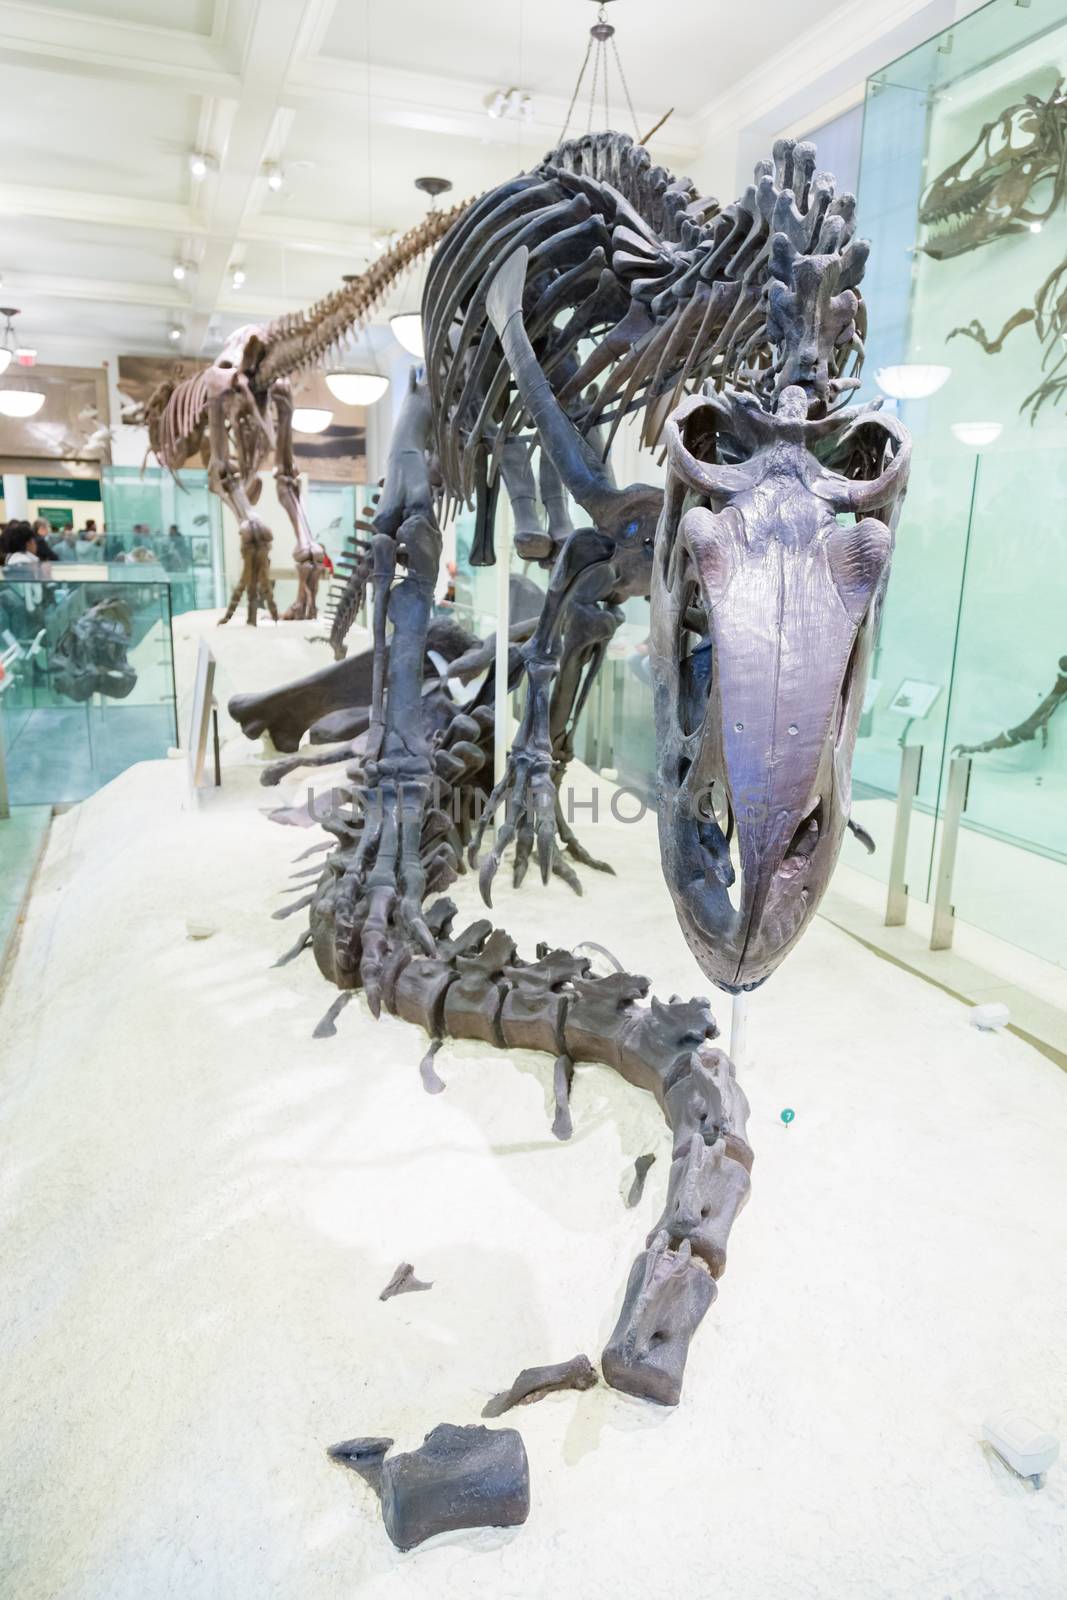 New York, United States of America - March 25: American Museum of Natural History holds large collection of prehistoric exhibits from all world. Dinosaur skeleton exhibit on March 25, 2015.